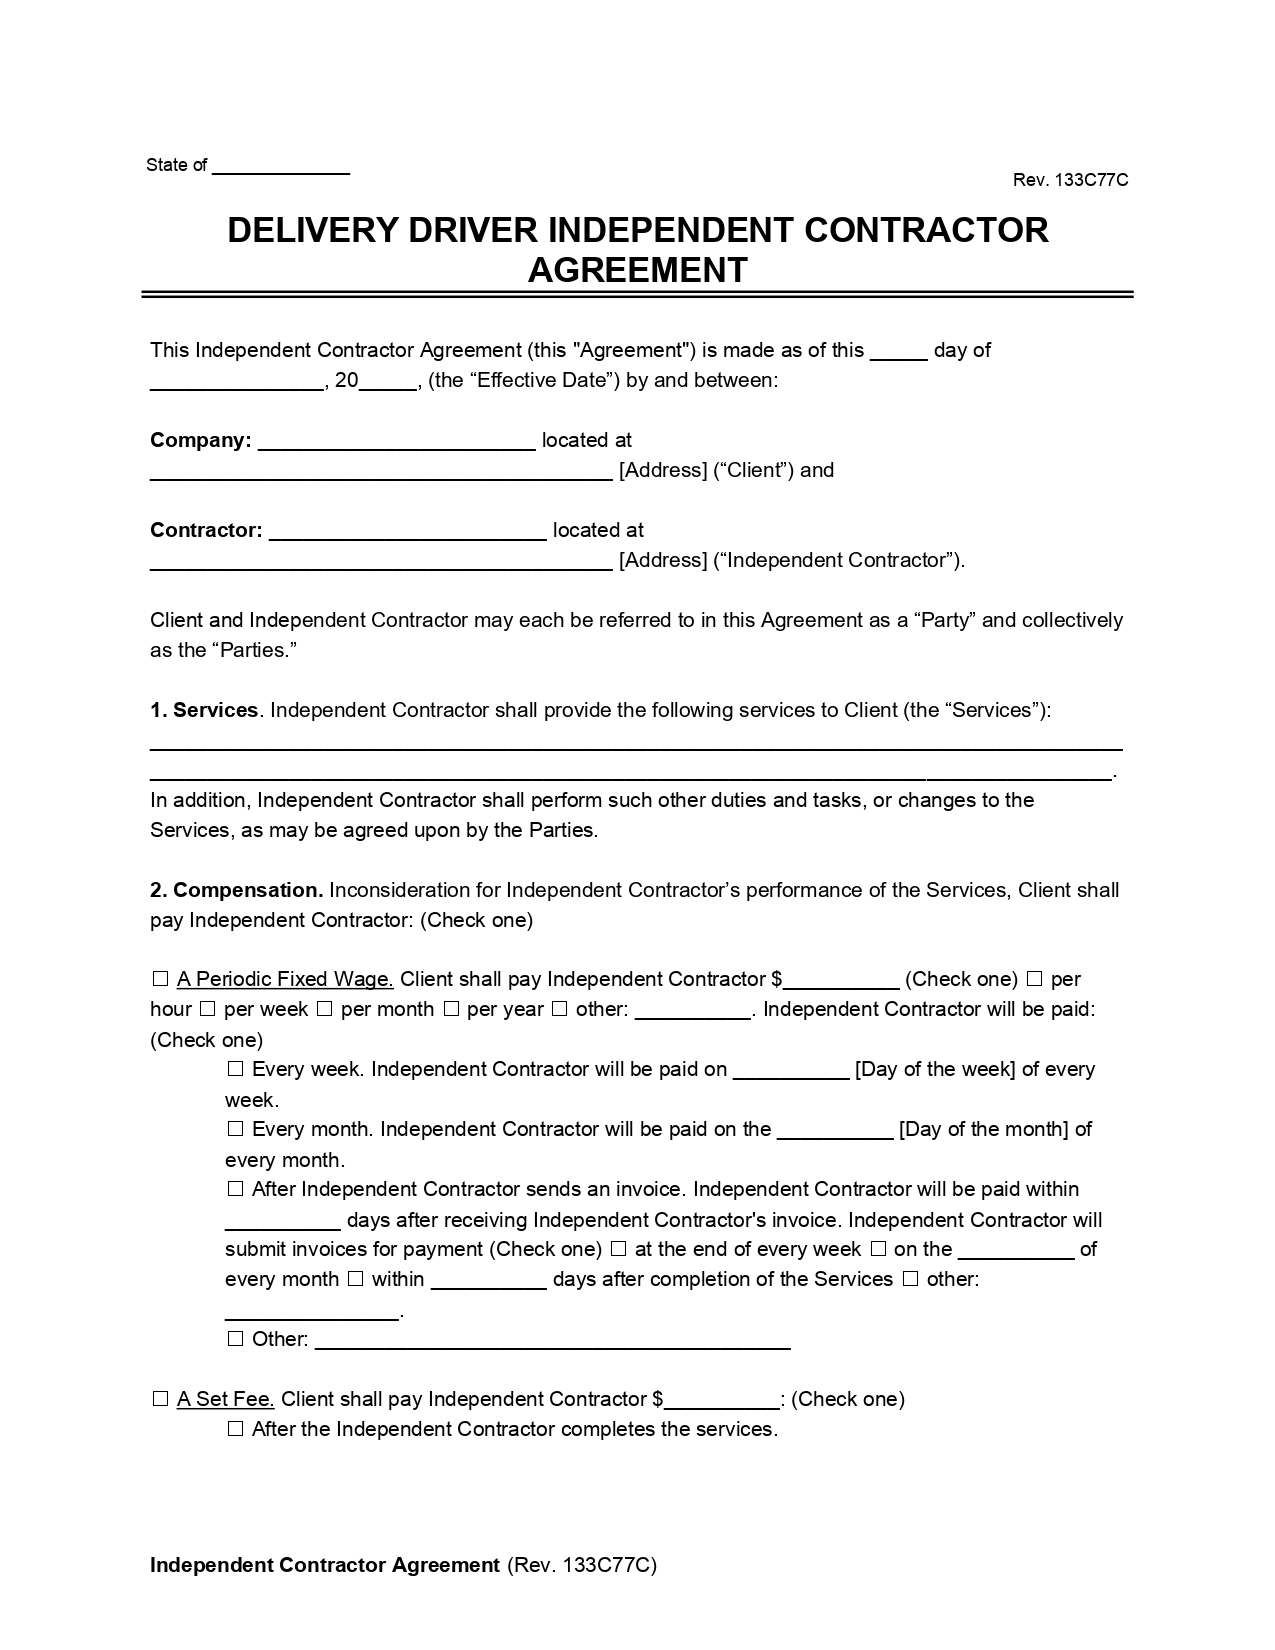 Delivery Driver Independent Contractor Agreement